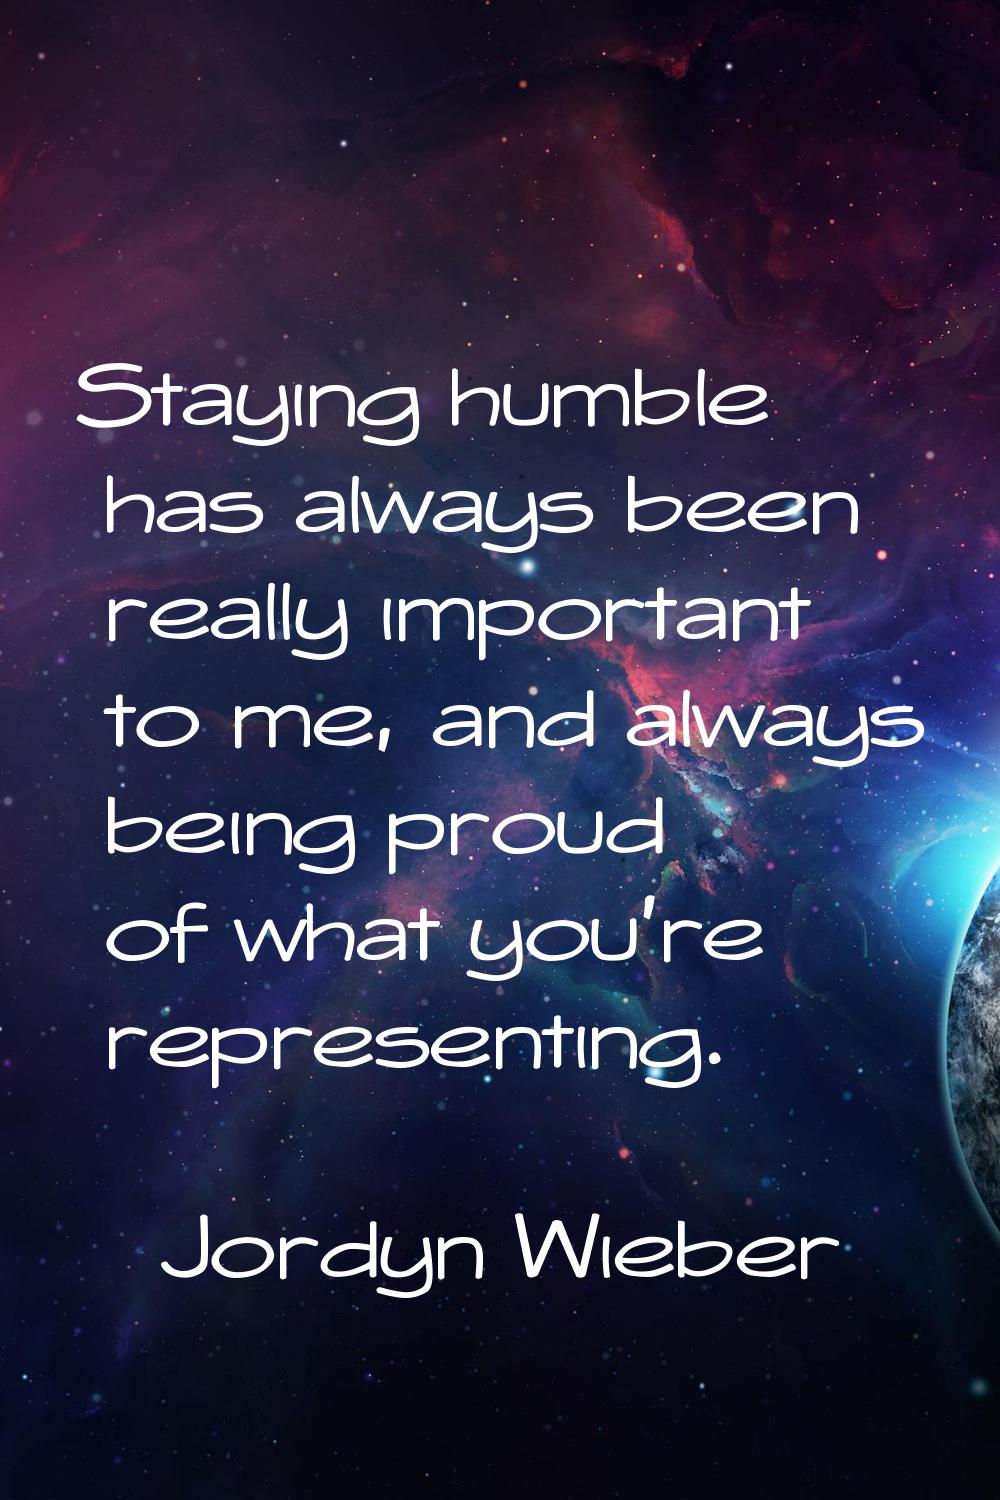 Staying humble has always been really important to me, and always being proud of what you're repres